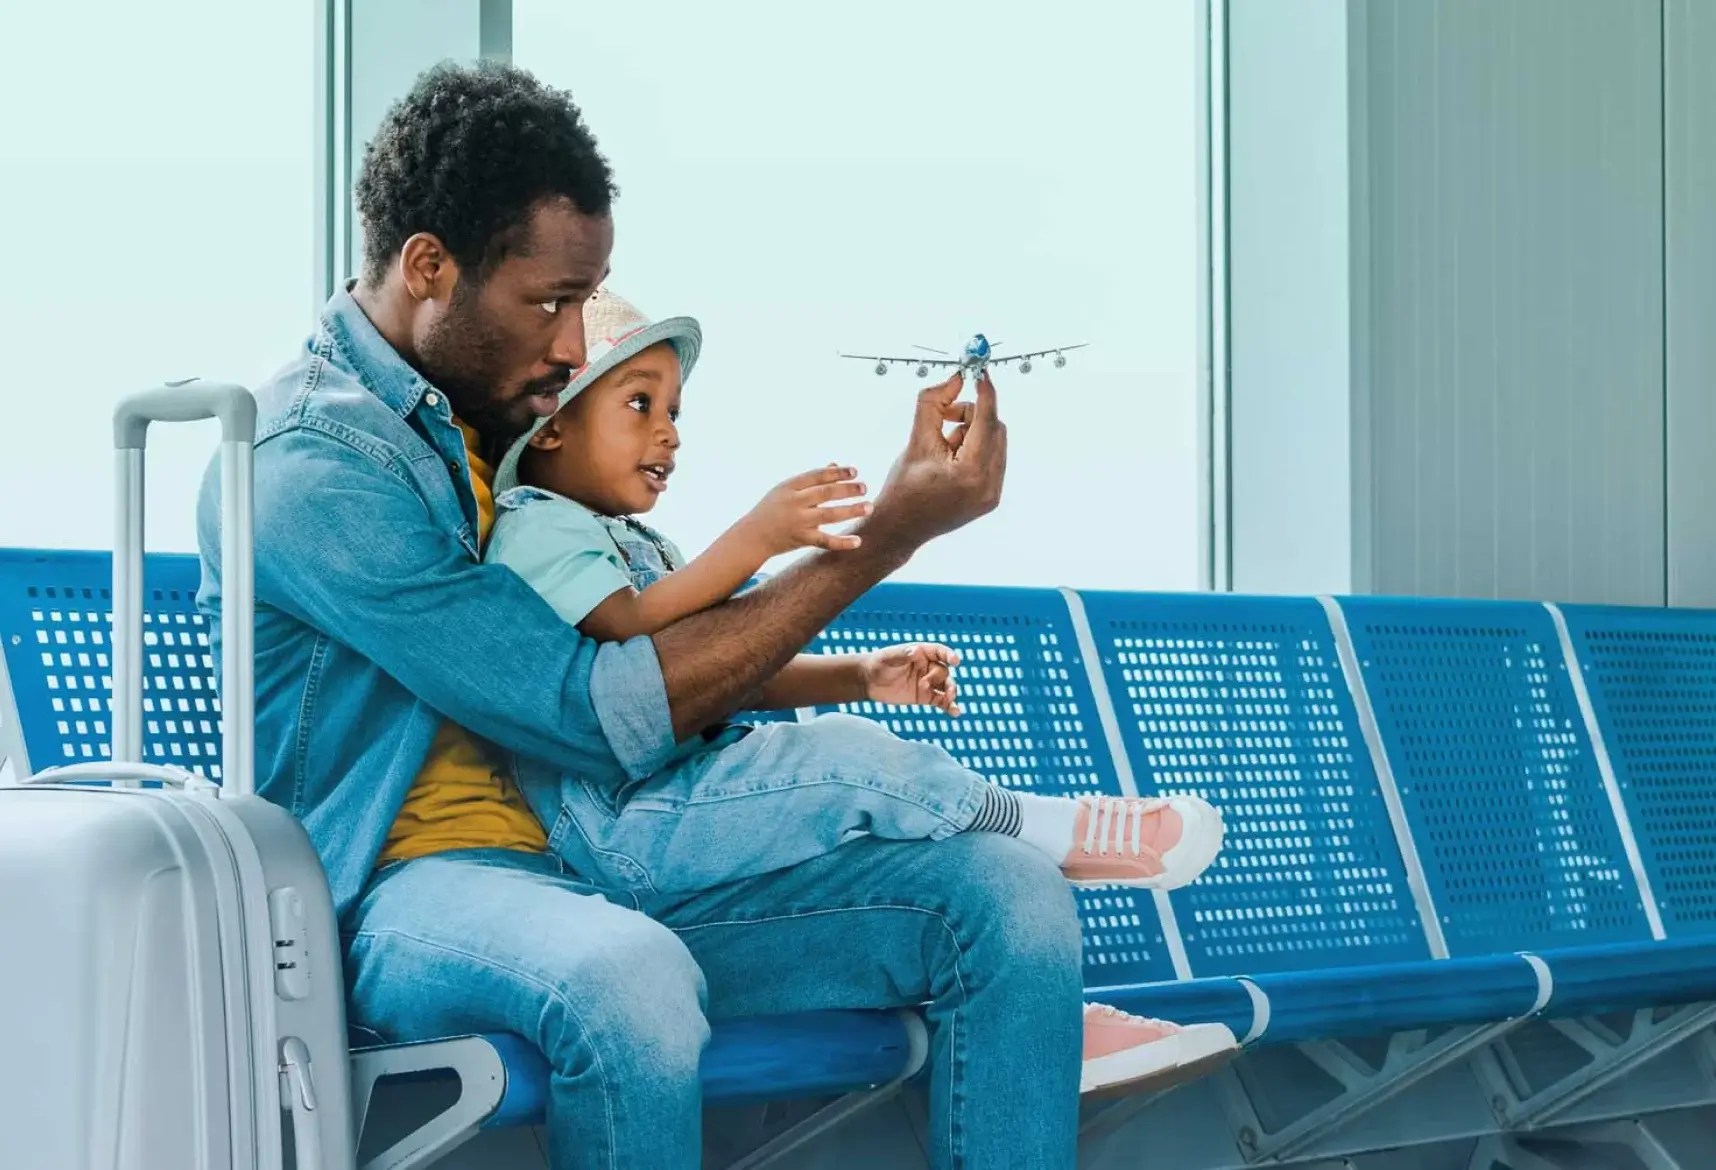 Father with son waiting at the airport playing with a toy plane